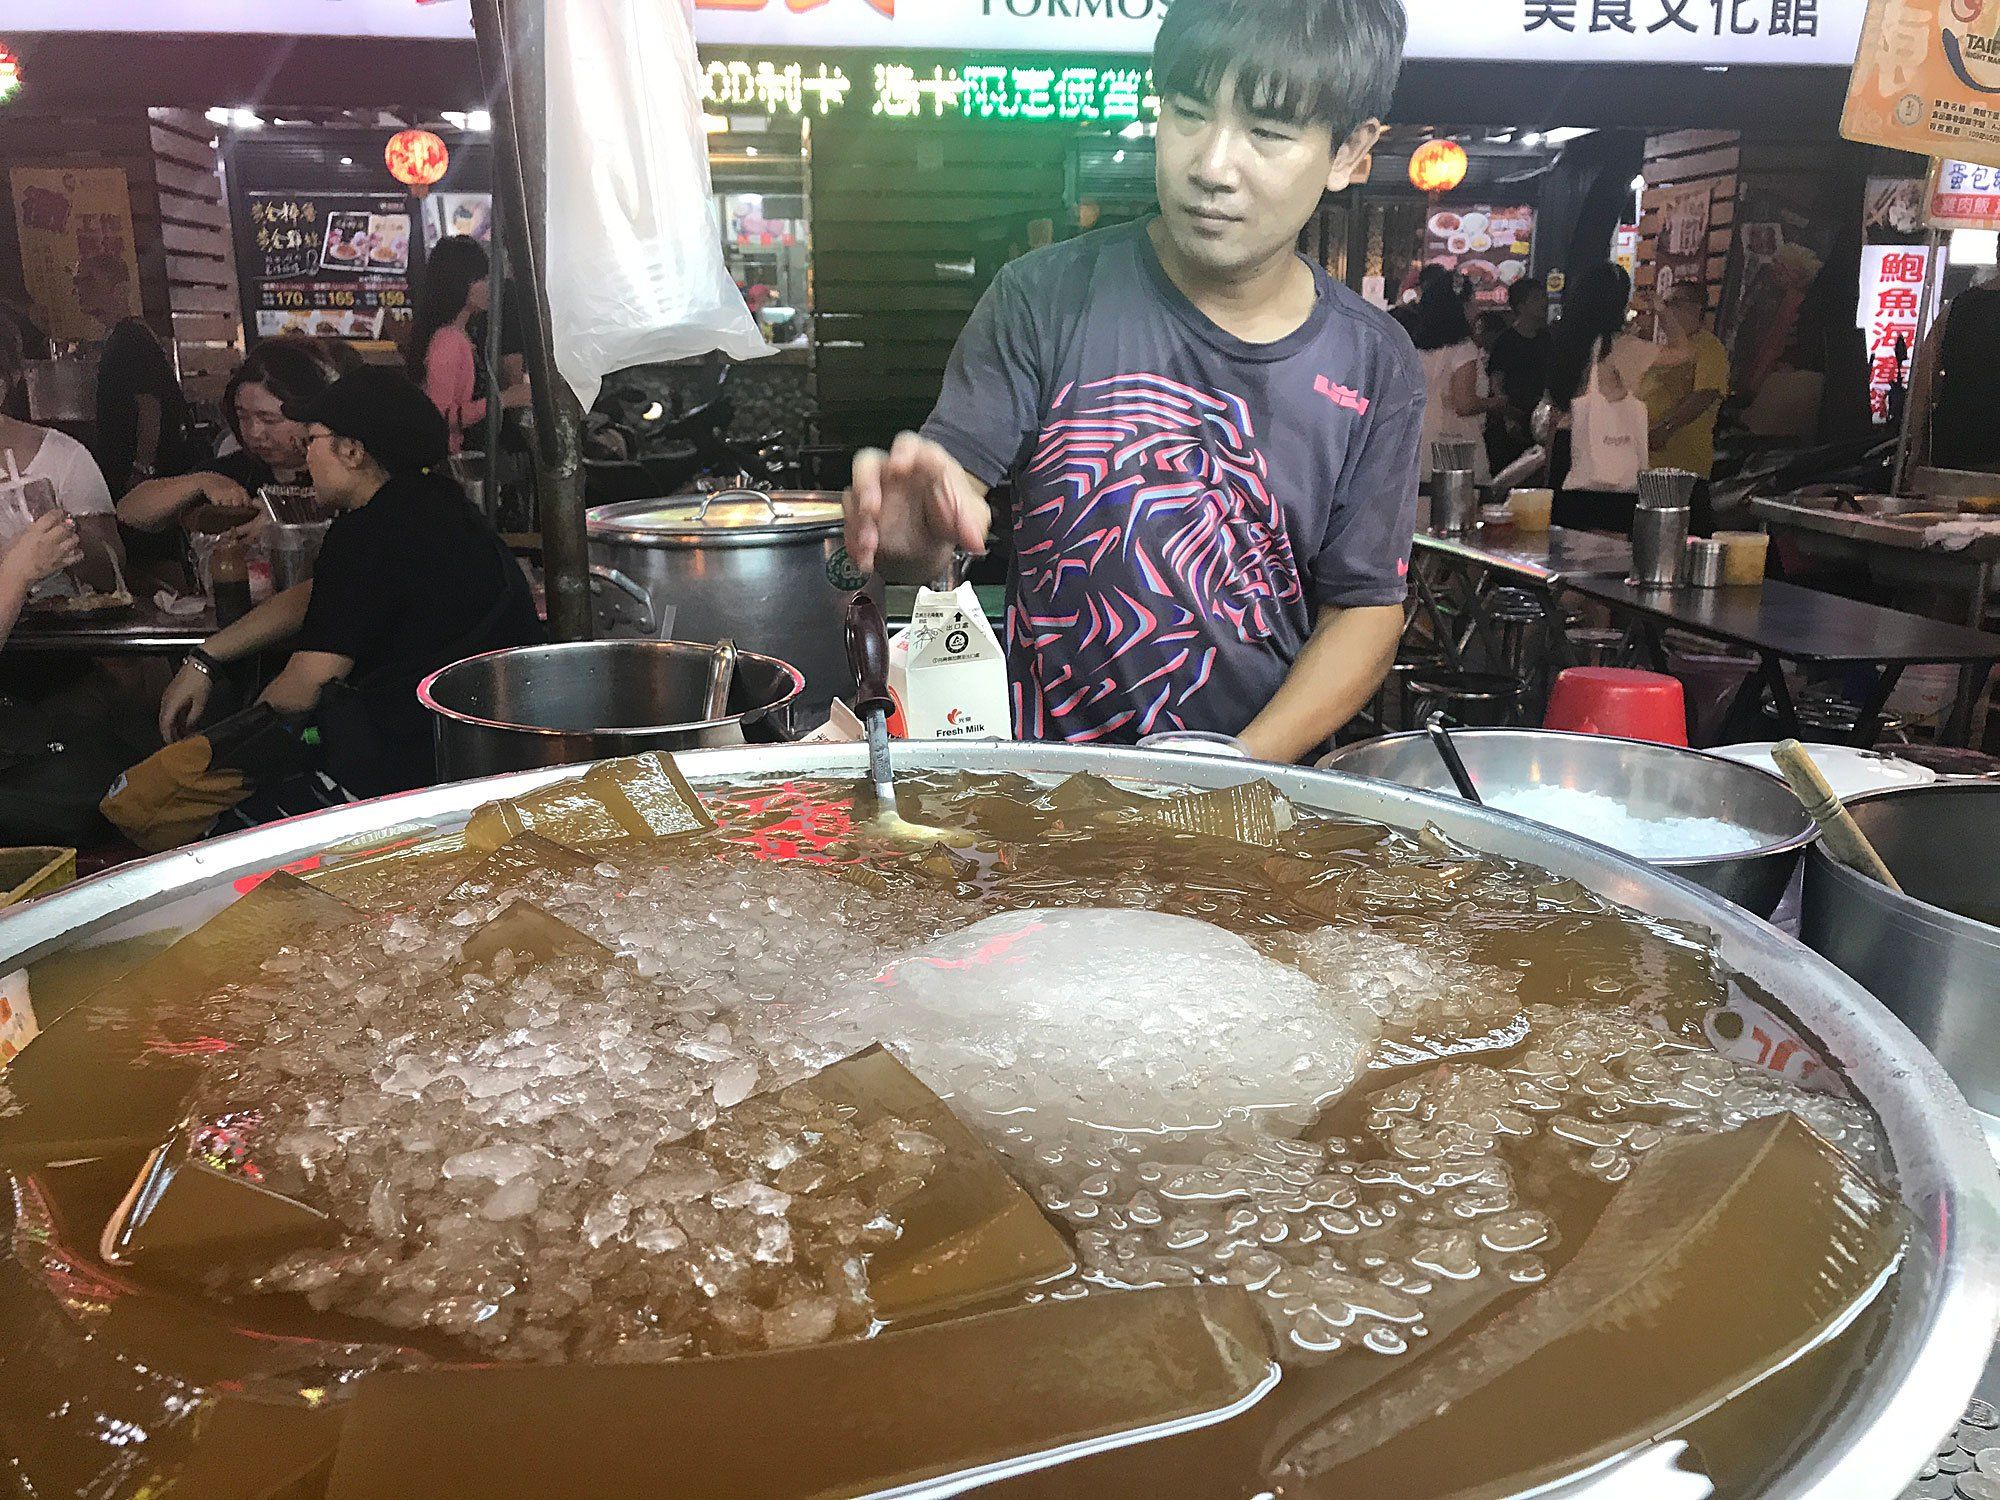 A vendor sells tea-flavored gelatin, a local favorite especially during Taiwan's tropical summer heat. Image by Melissa McCart. Taiwan, 2018. 